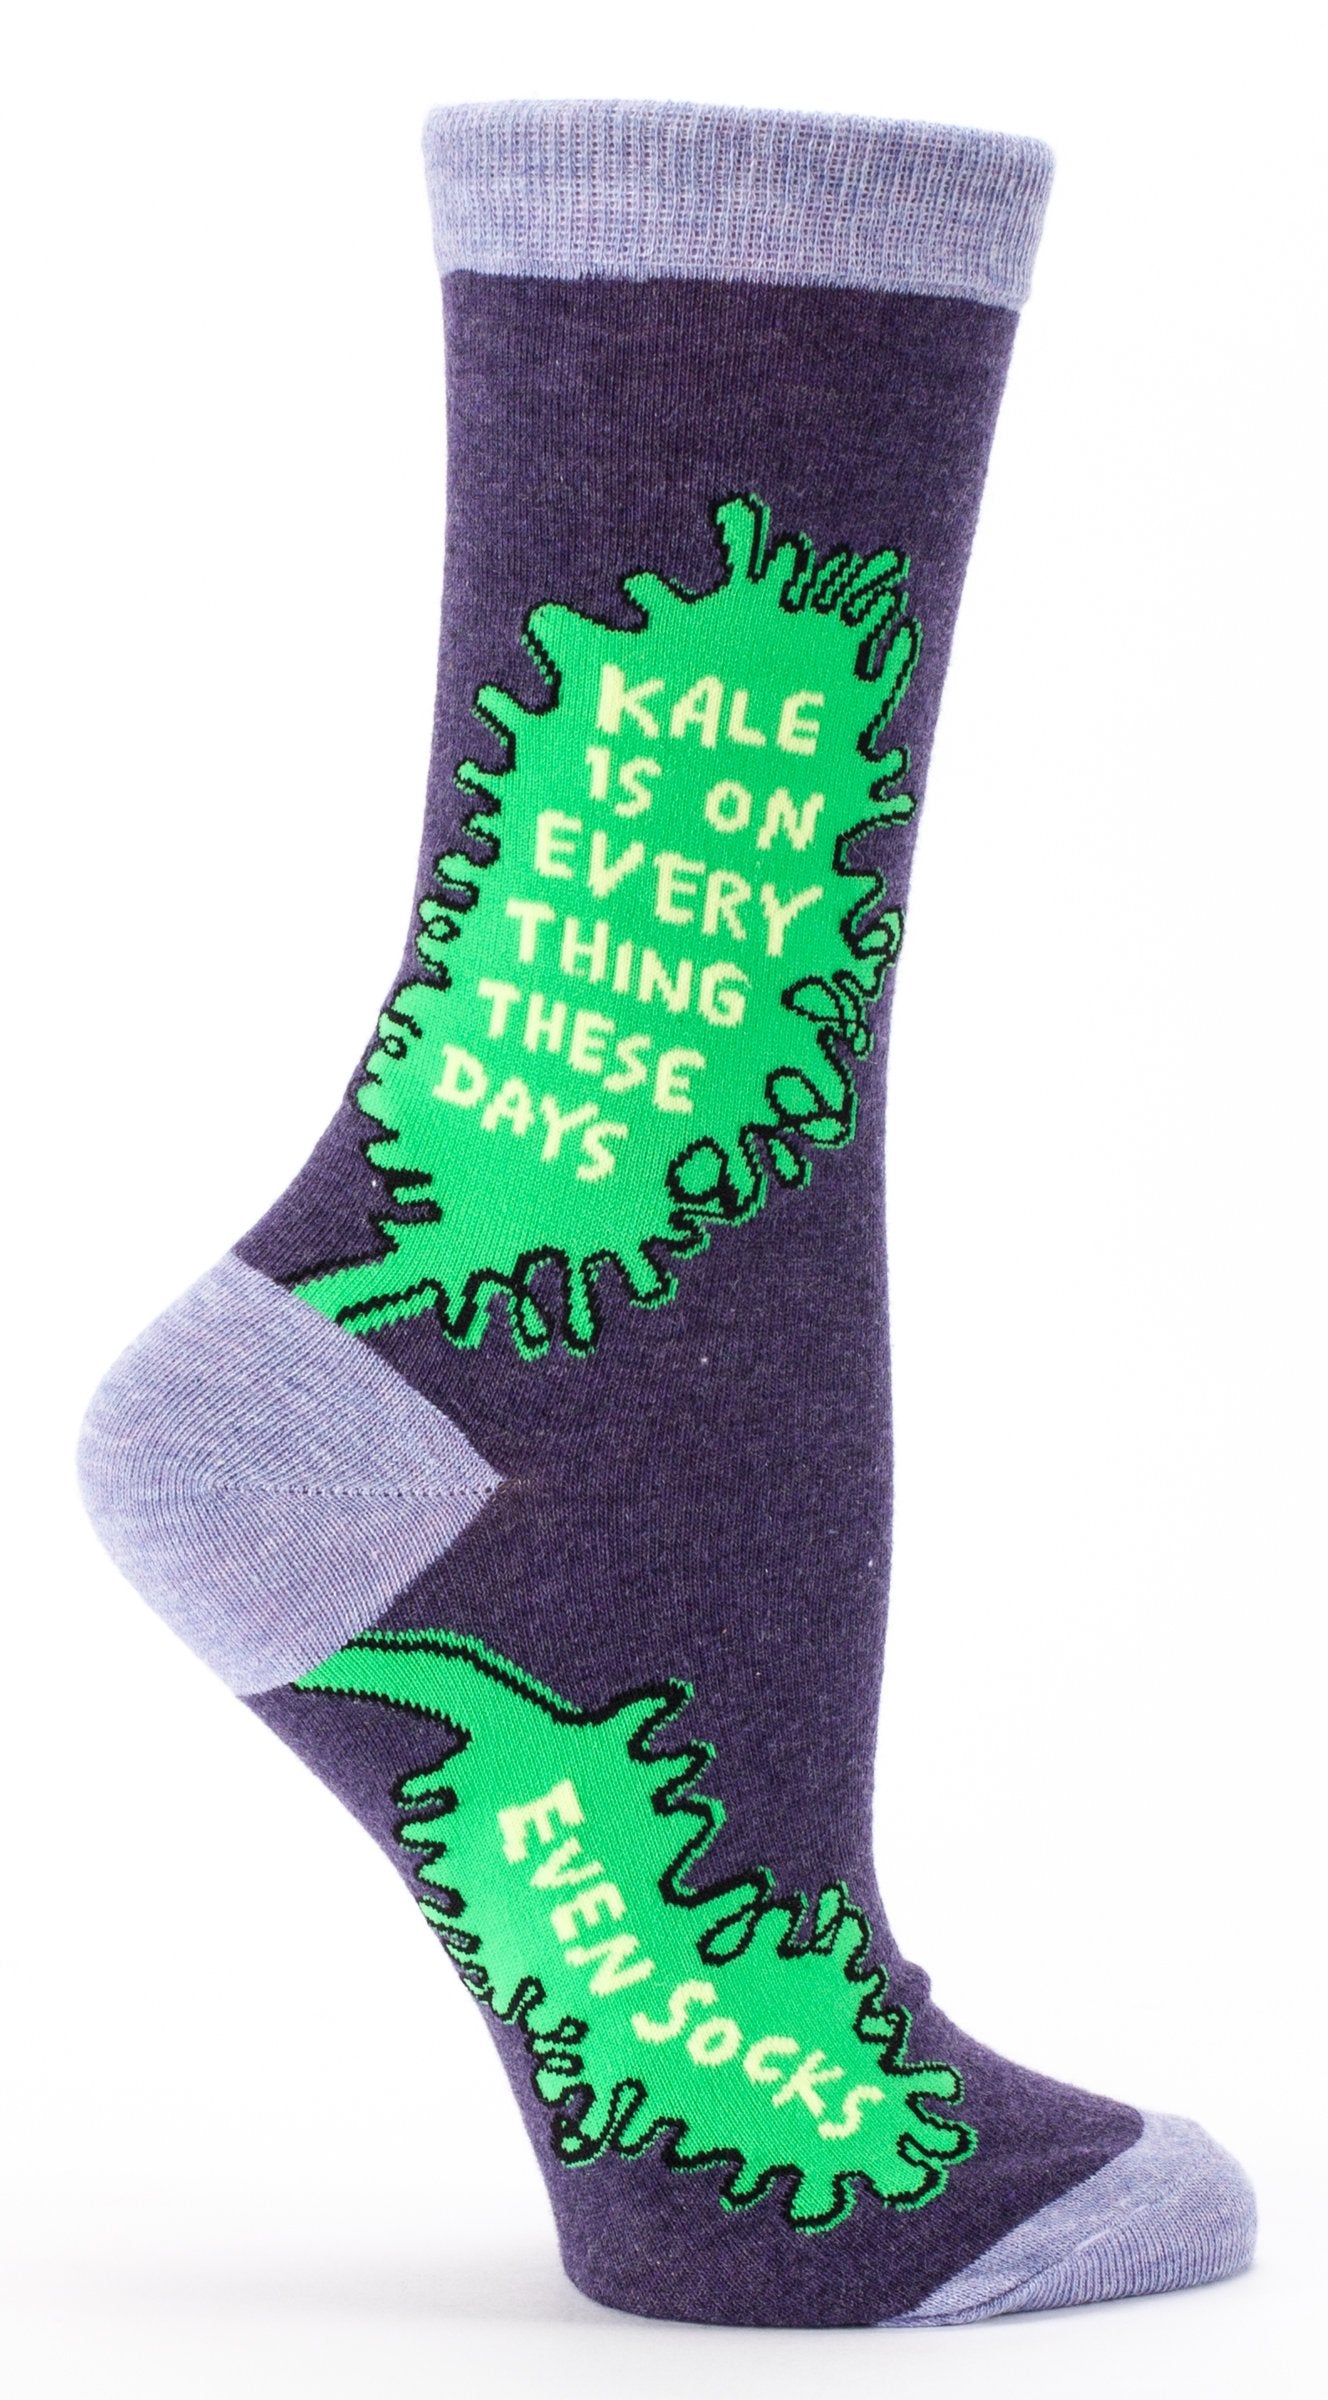 Blue Q - Women's Crew Socks - Kale Is On Everything These Days